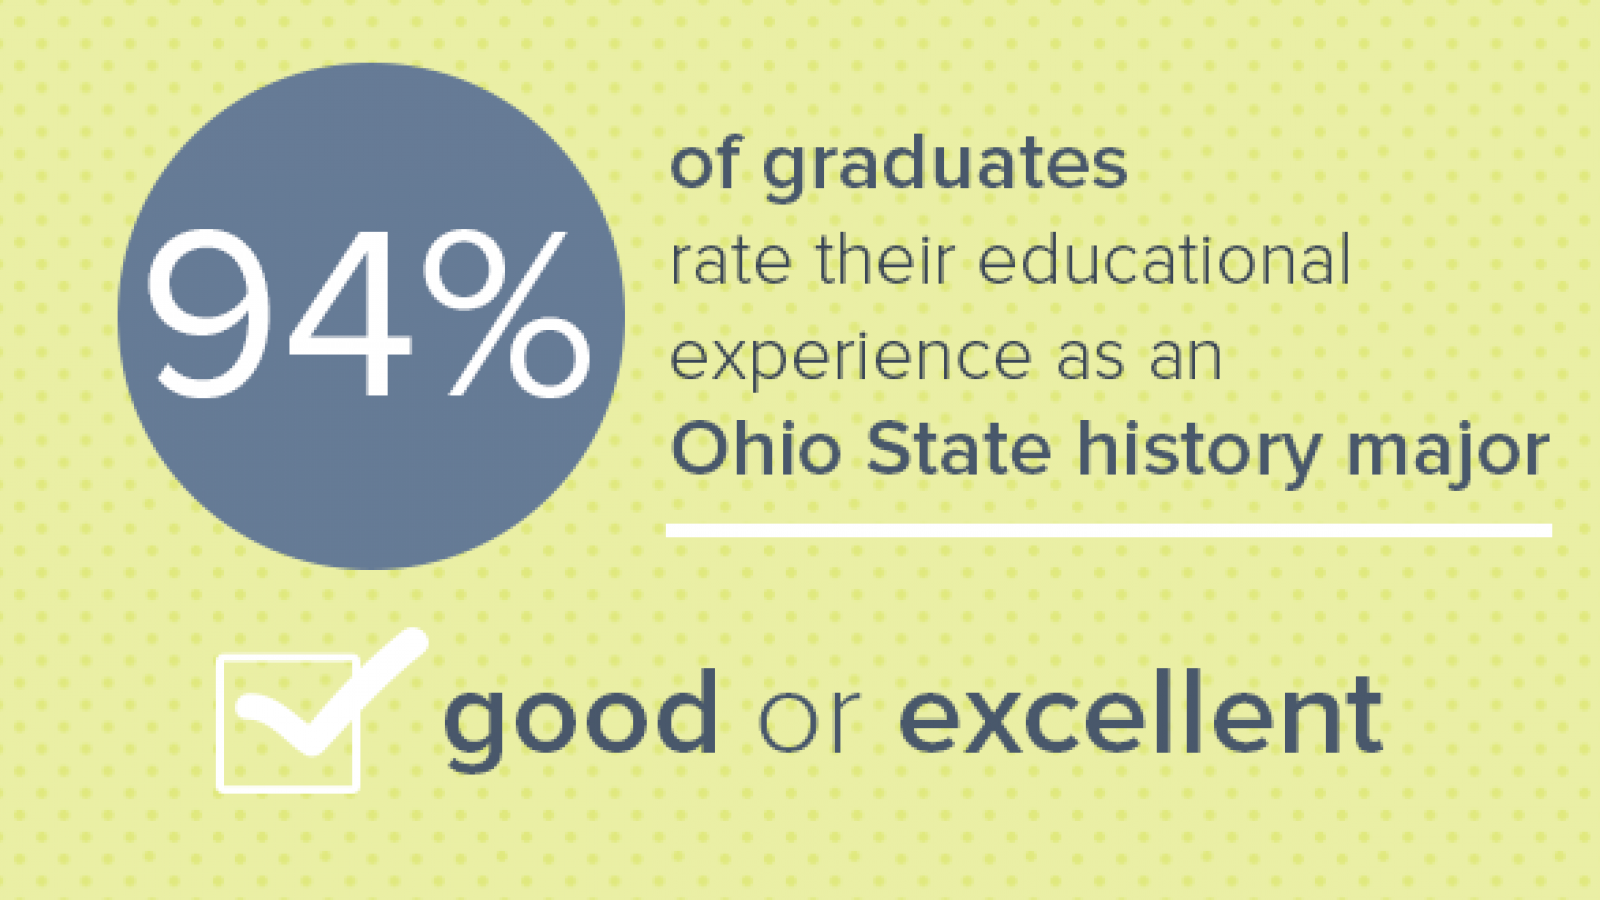 94% of graduates rate their educational experience as an Ohio State history major good or excellent.